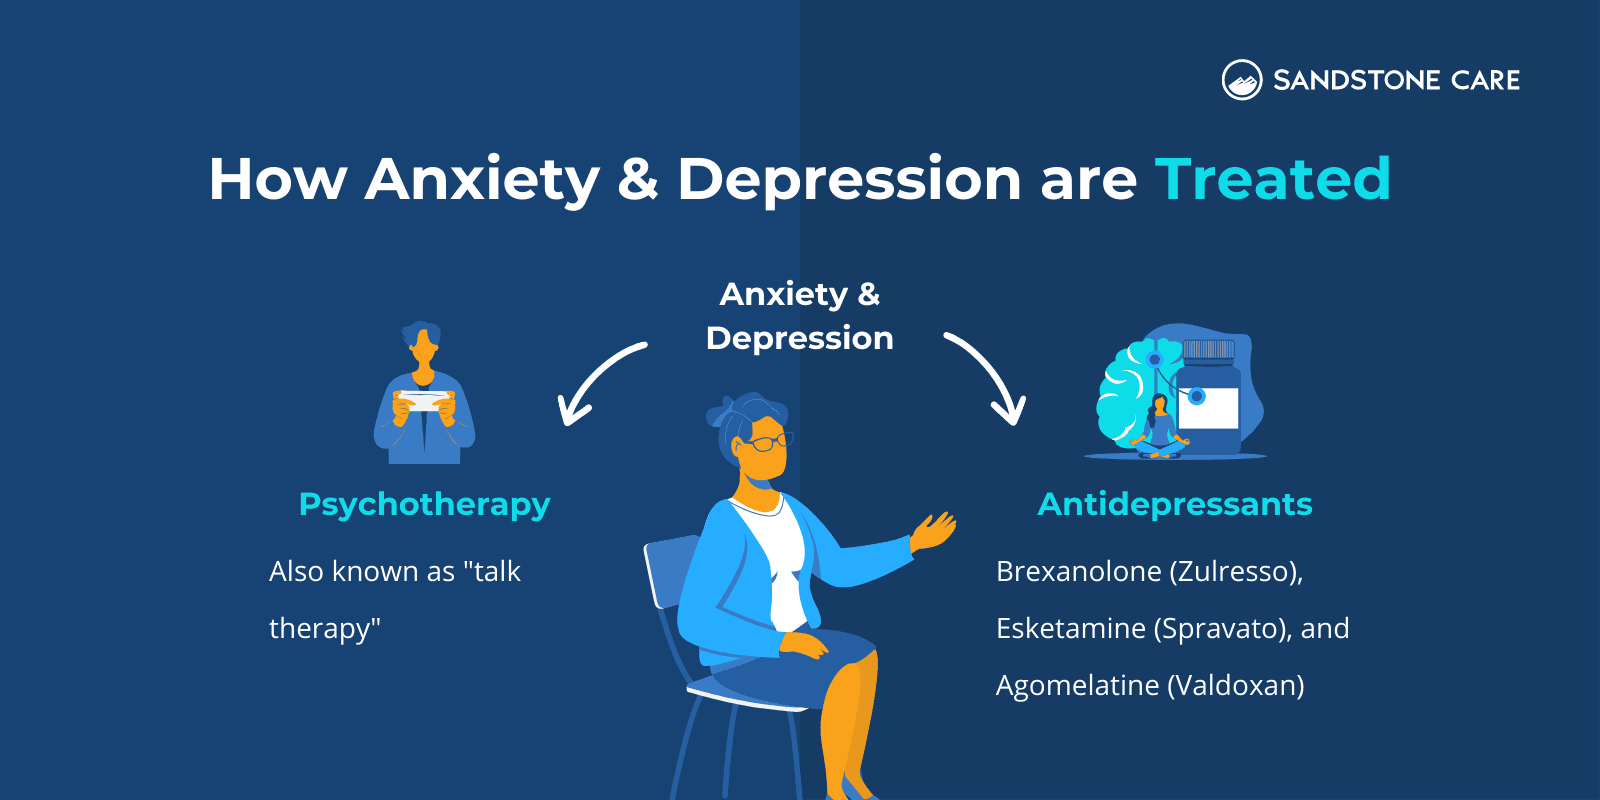 "How Anxiety & Depression are Treated" written above how therapists use psychotherapy and antidepressants represented with relevant graphics